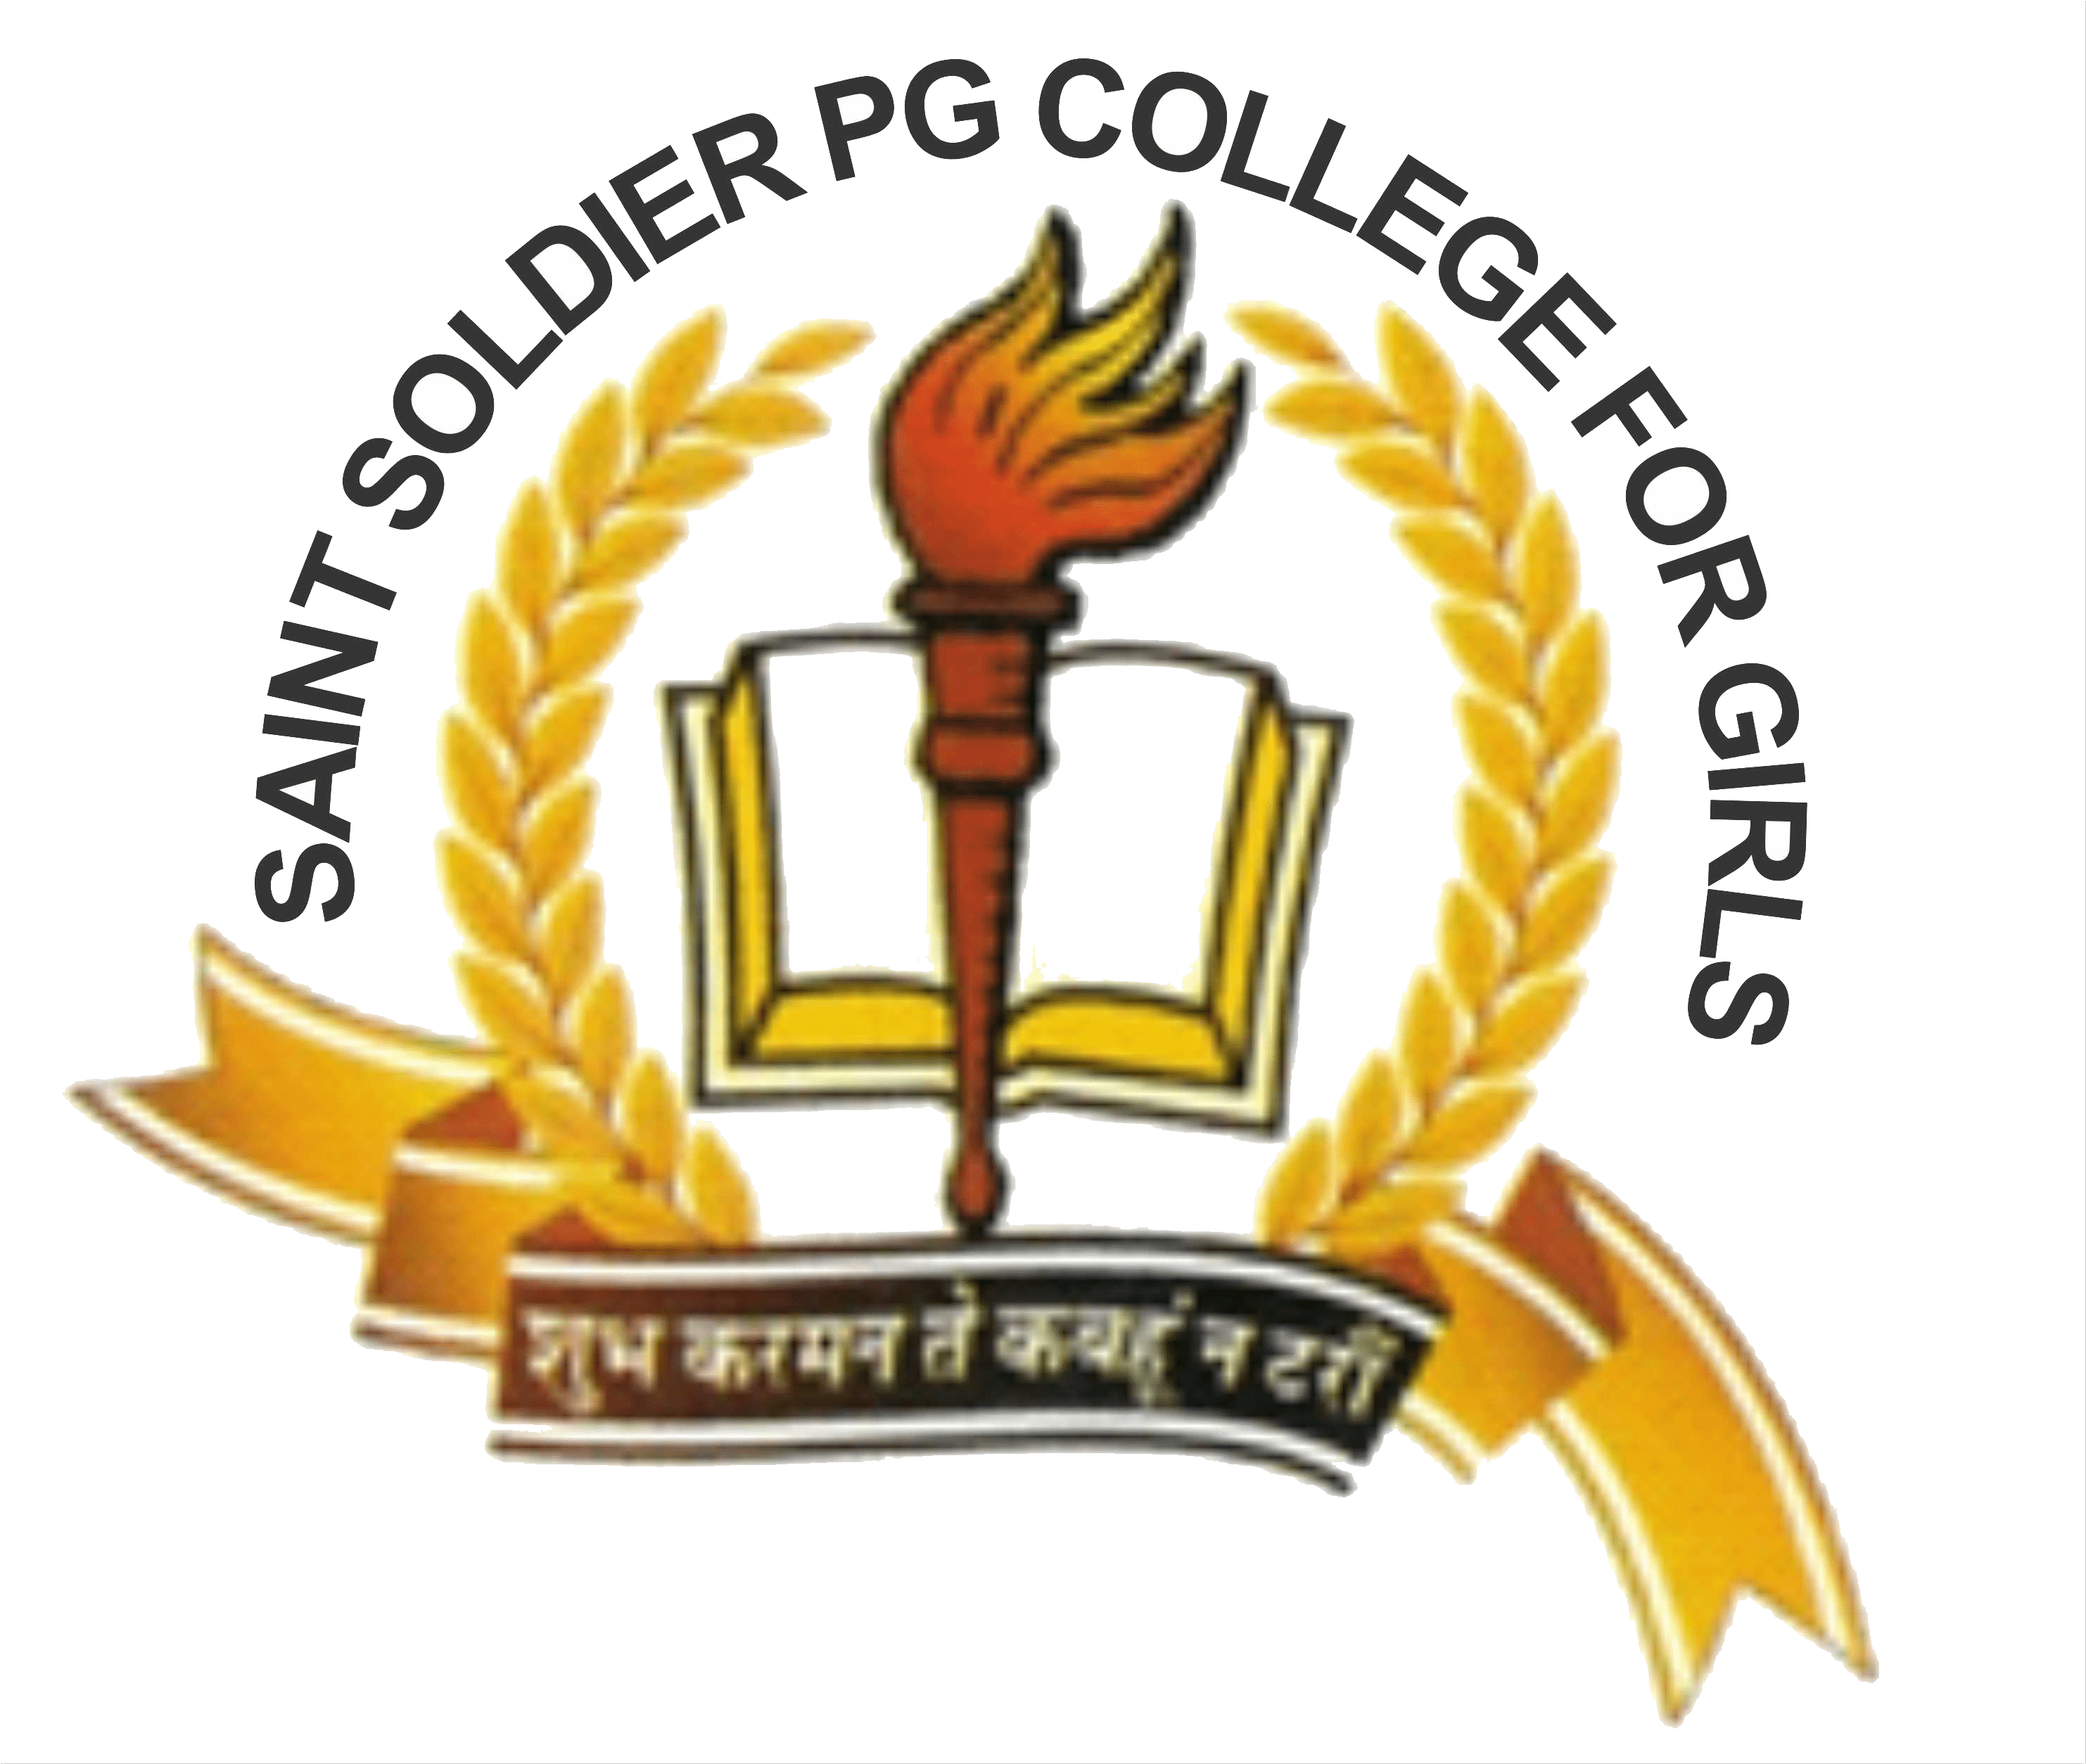 Saint Soldier PG College for Girls